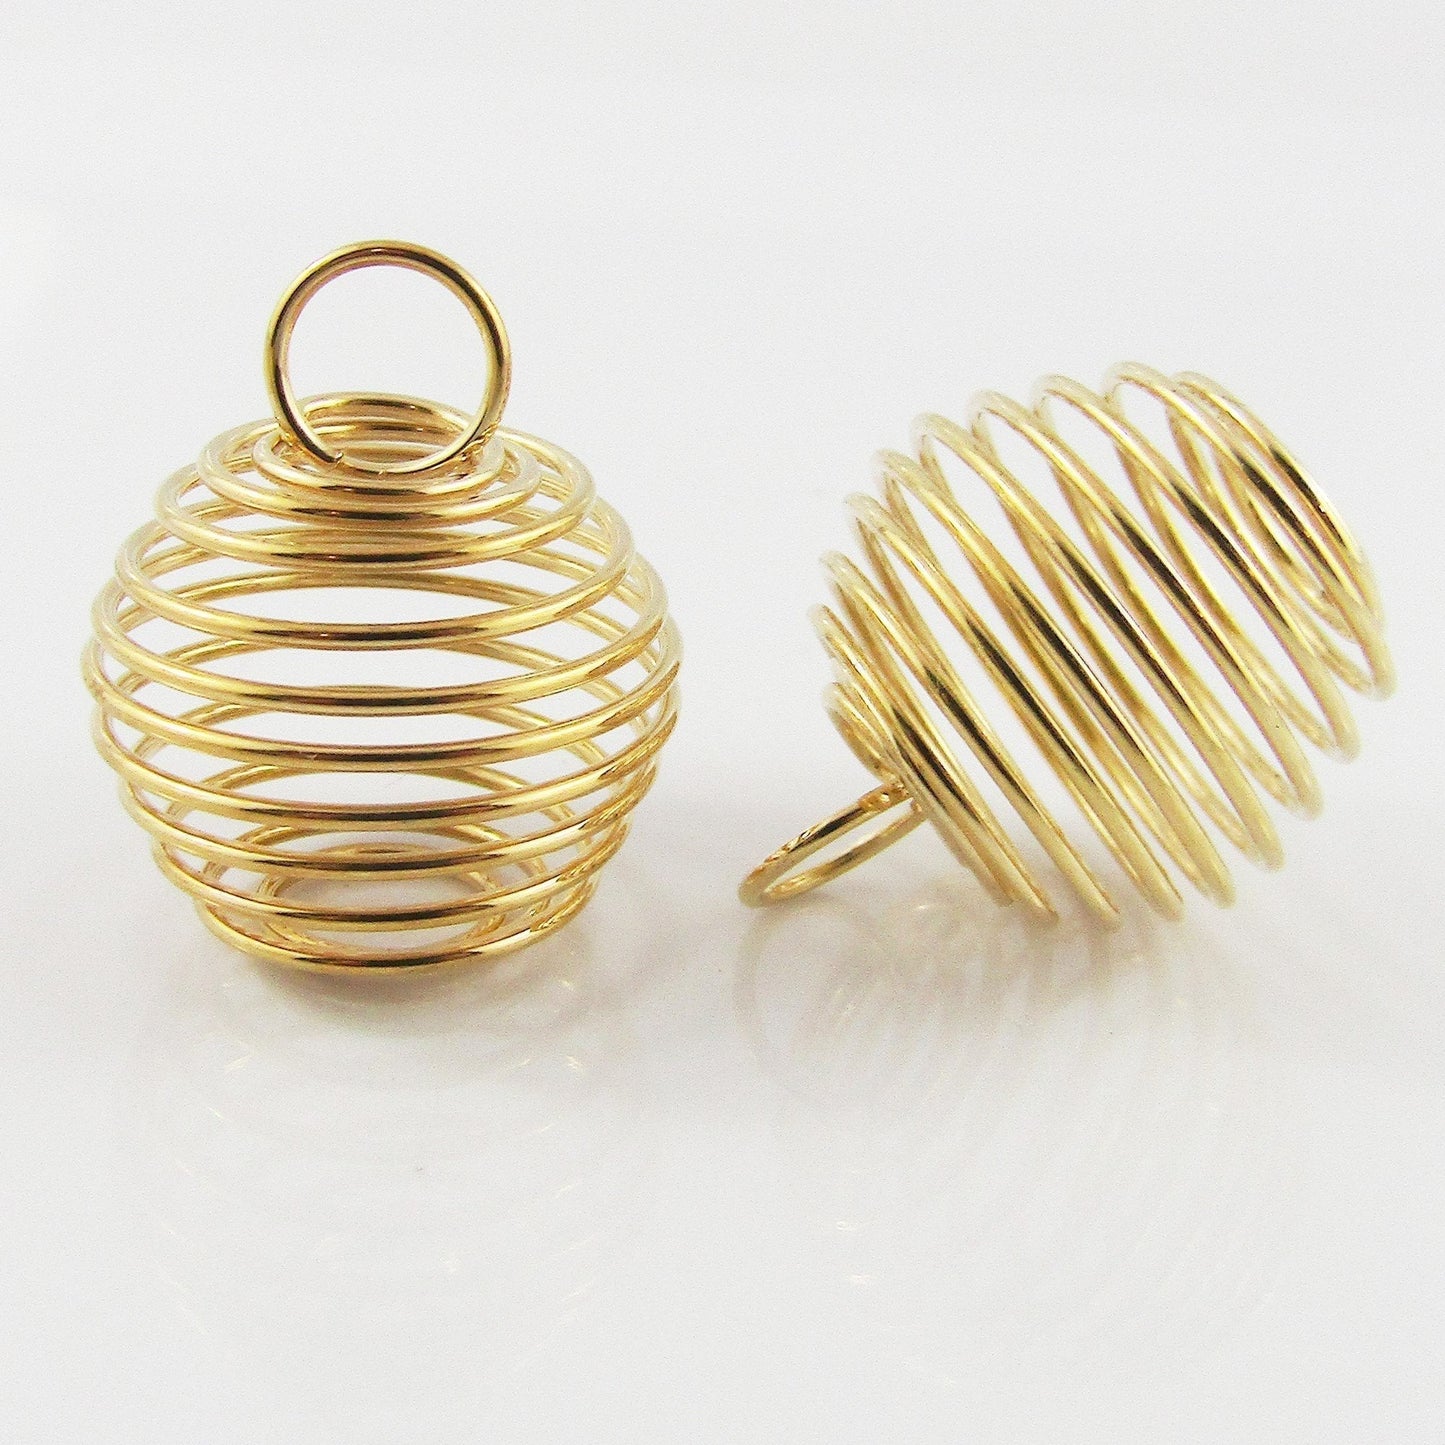 Bulk 5pce Lantern Bead Cage Charm Spiral Pendant Wrapped Wire 21x19mm Gold Plate